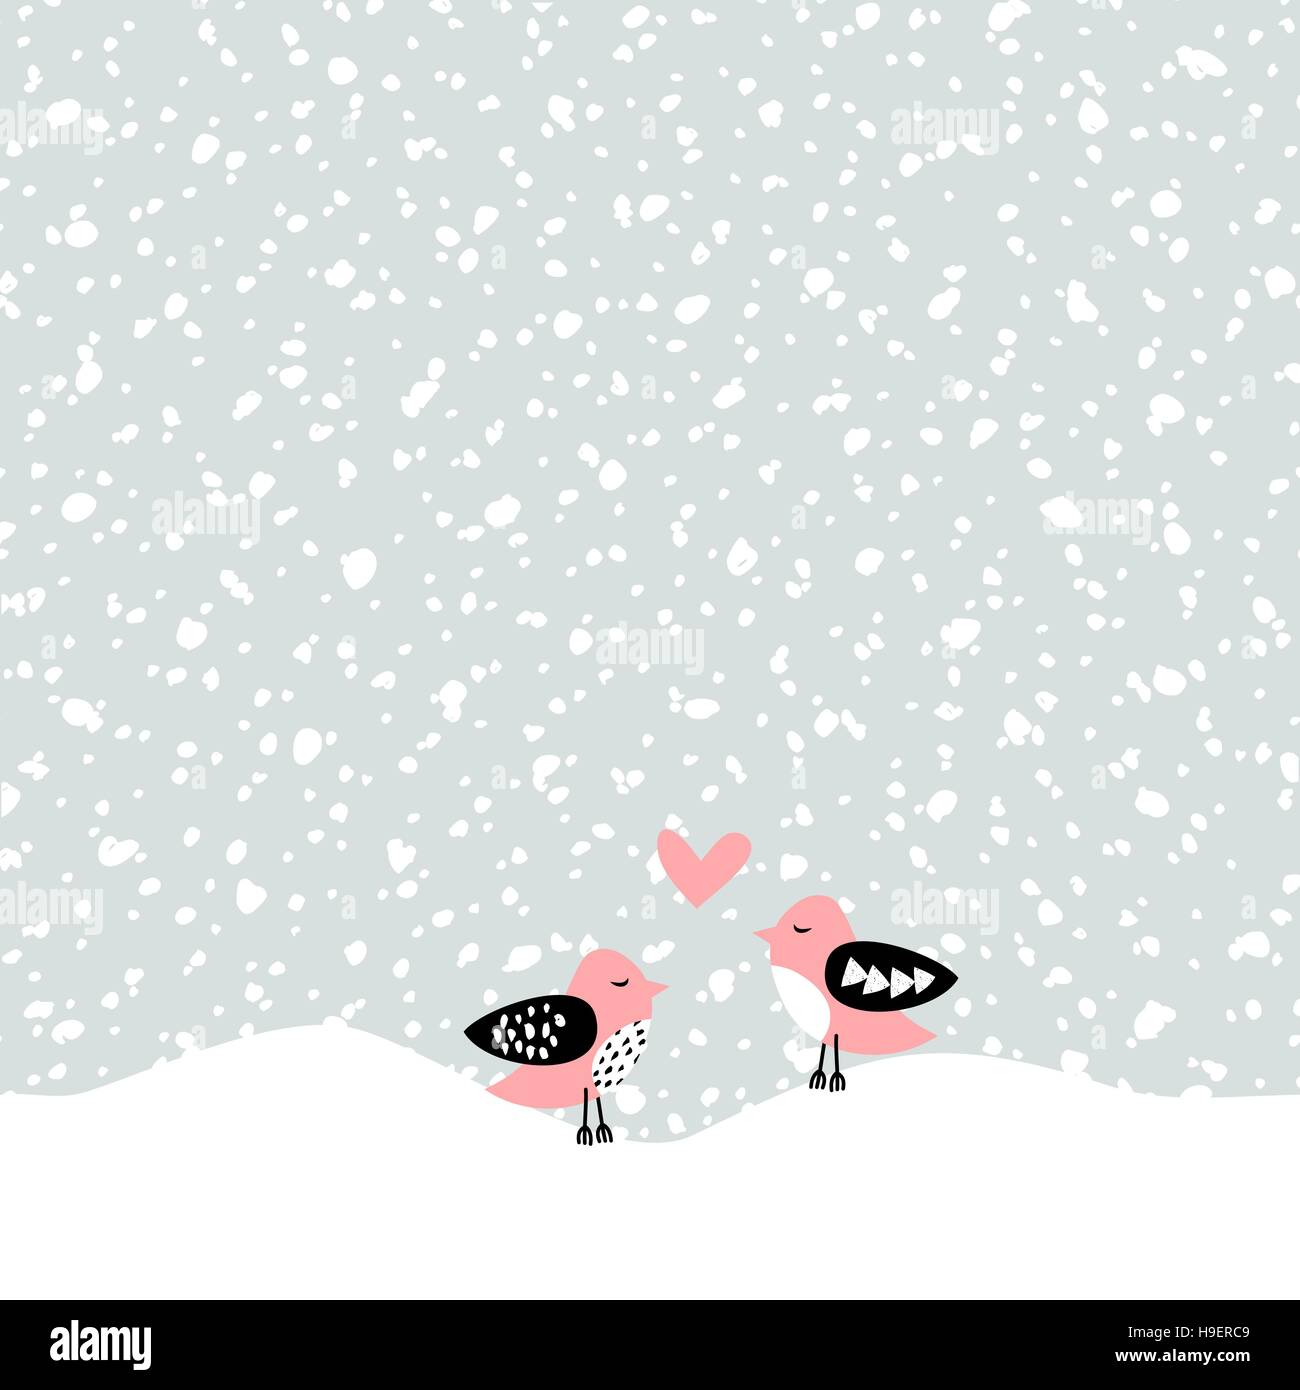 Seamless repeat pattern with falling snow in white and light gray. Two cute birds in love under the snowfall. Winter textile, wall art, wrapping paper Stock Vector